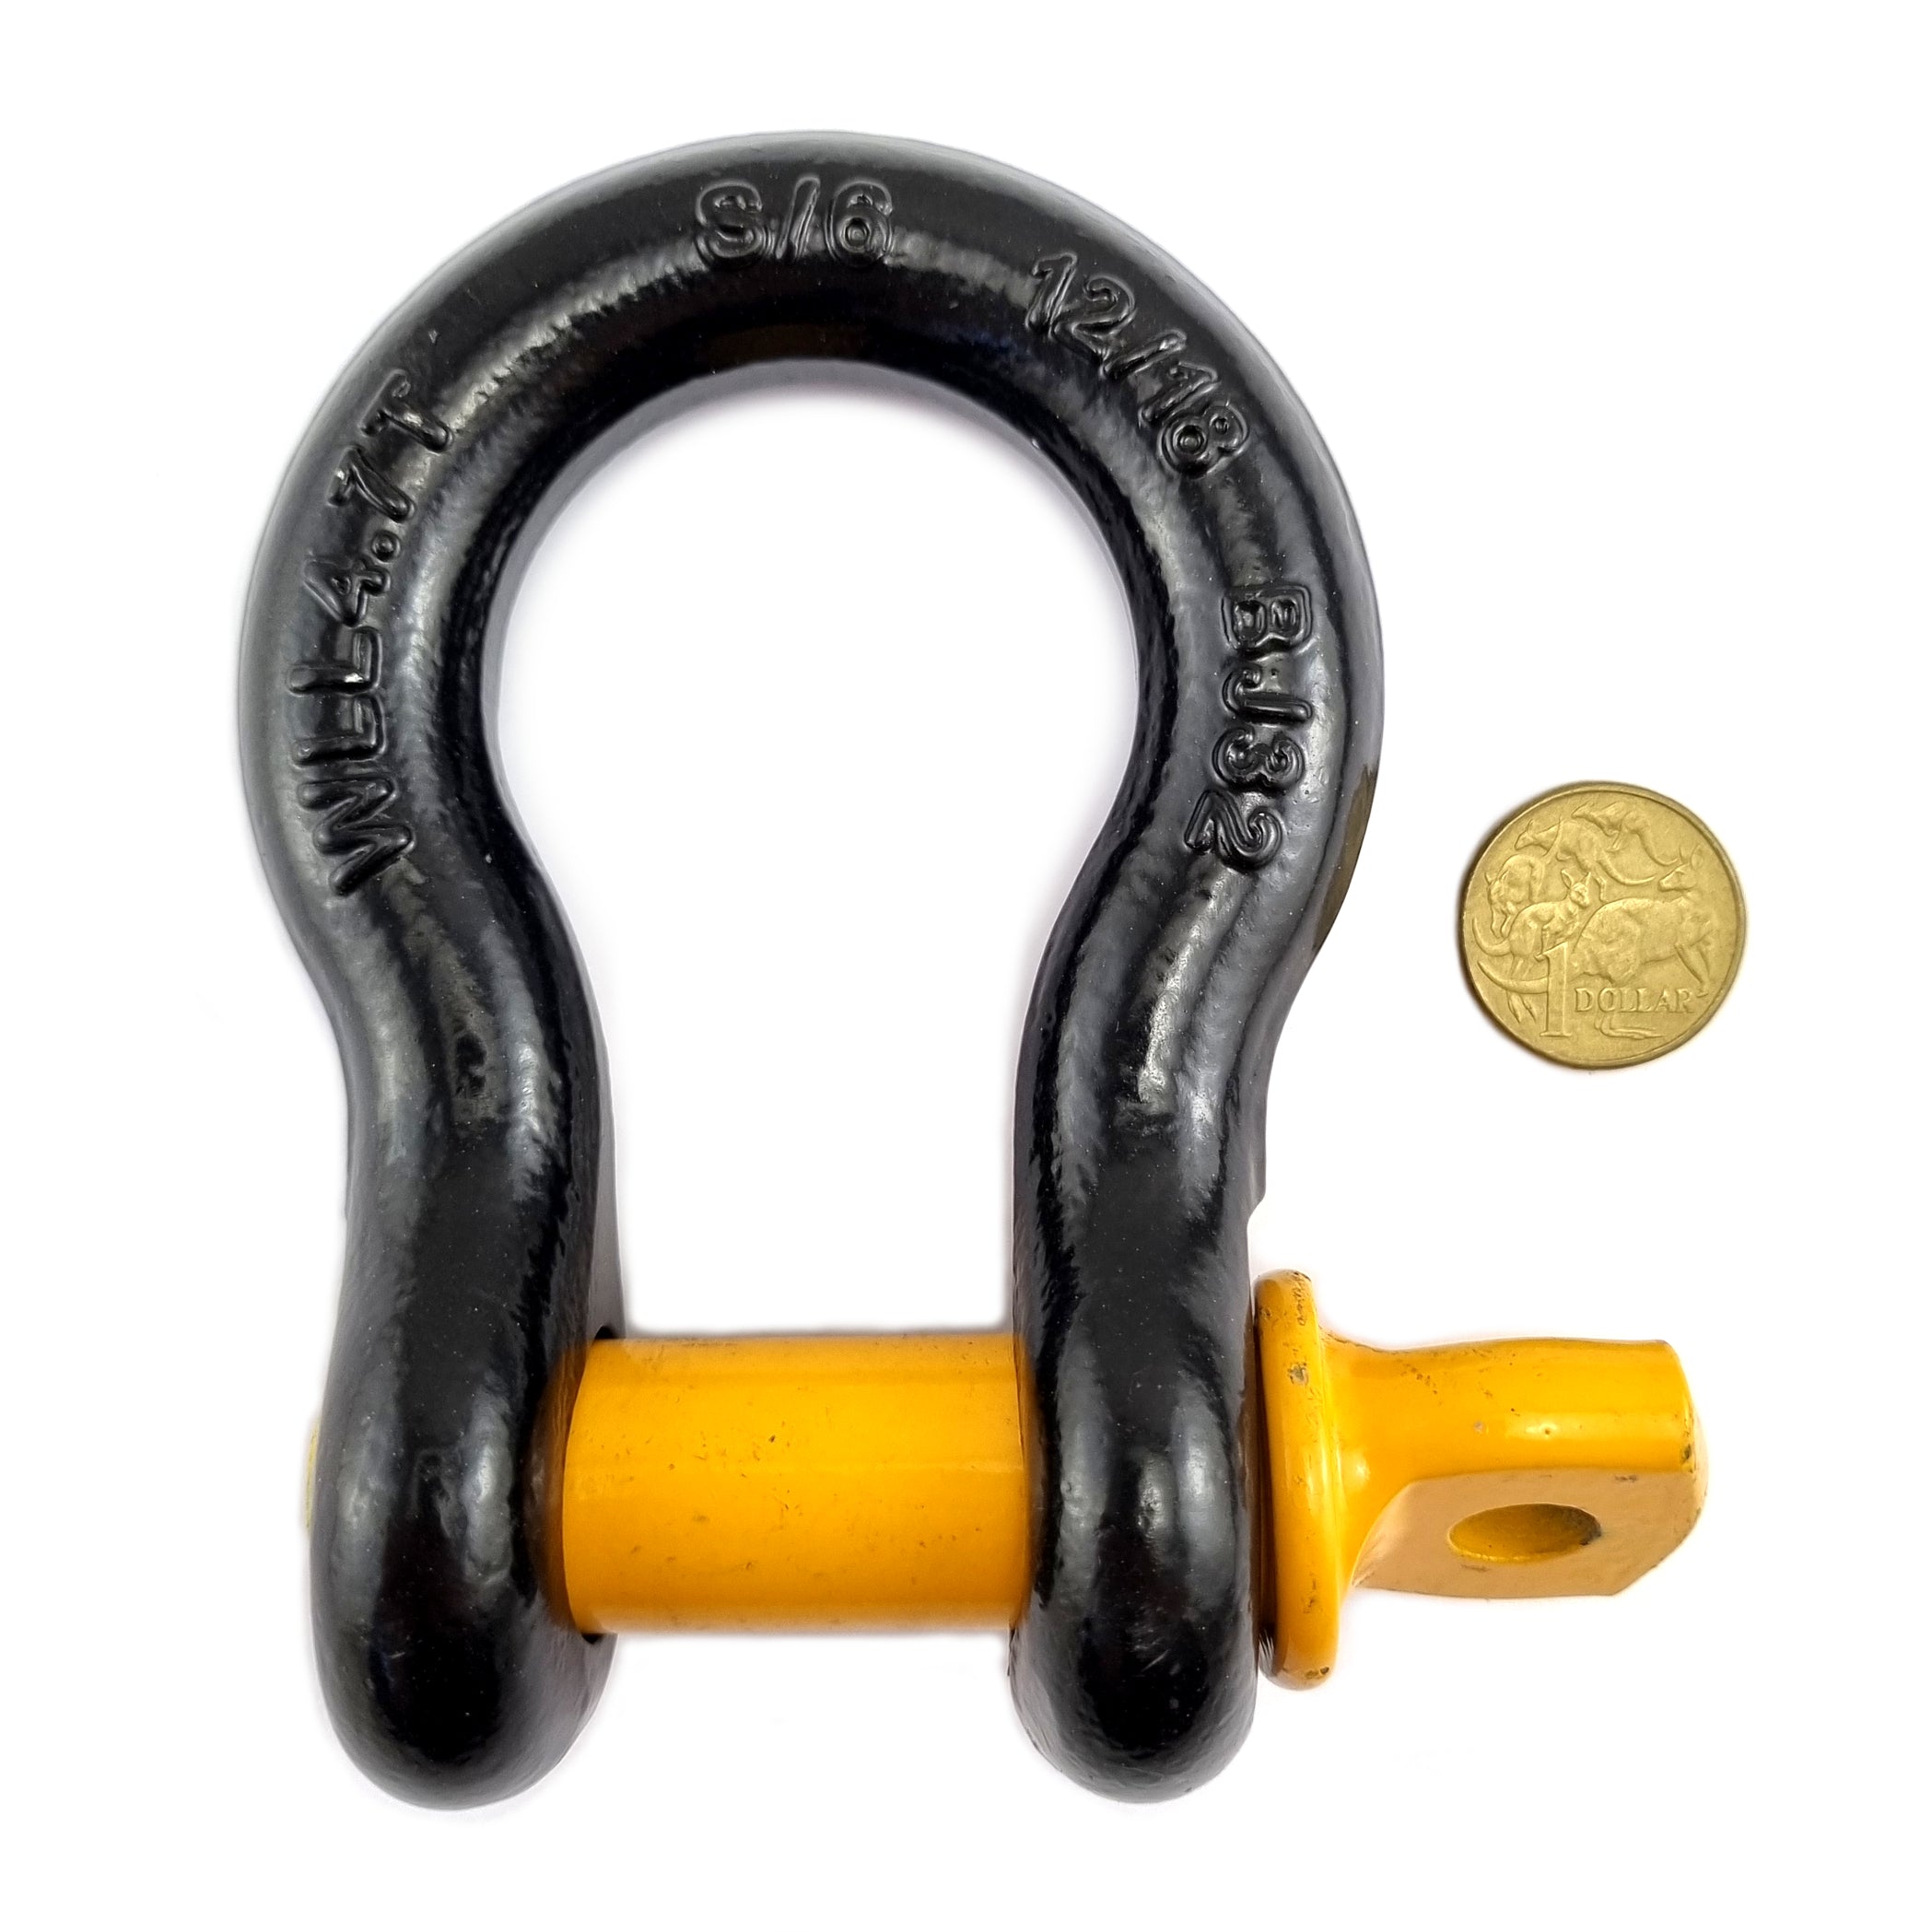 Shop stainless steel bow shackles and black bow shackles online chain.com.au